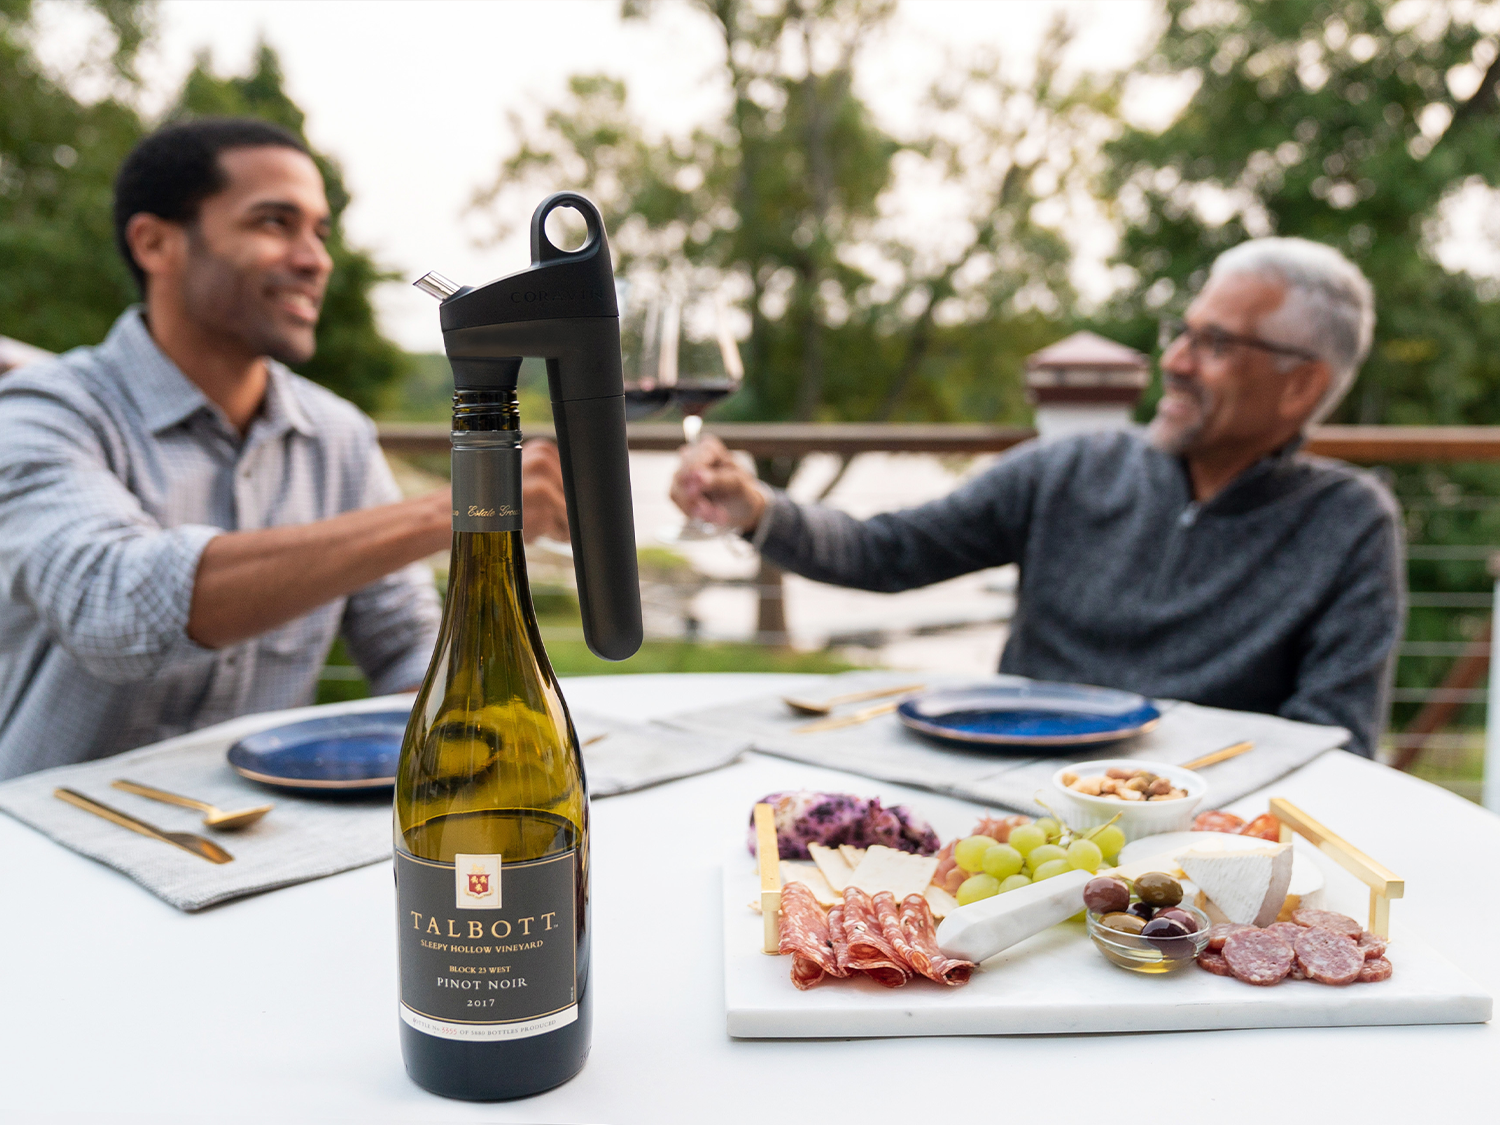 Pivot Wine Preservation System on bottle with man and son enjoying wine in the background